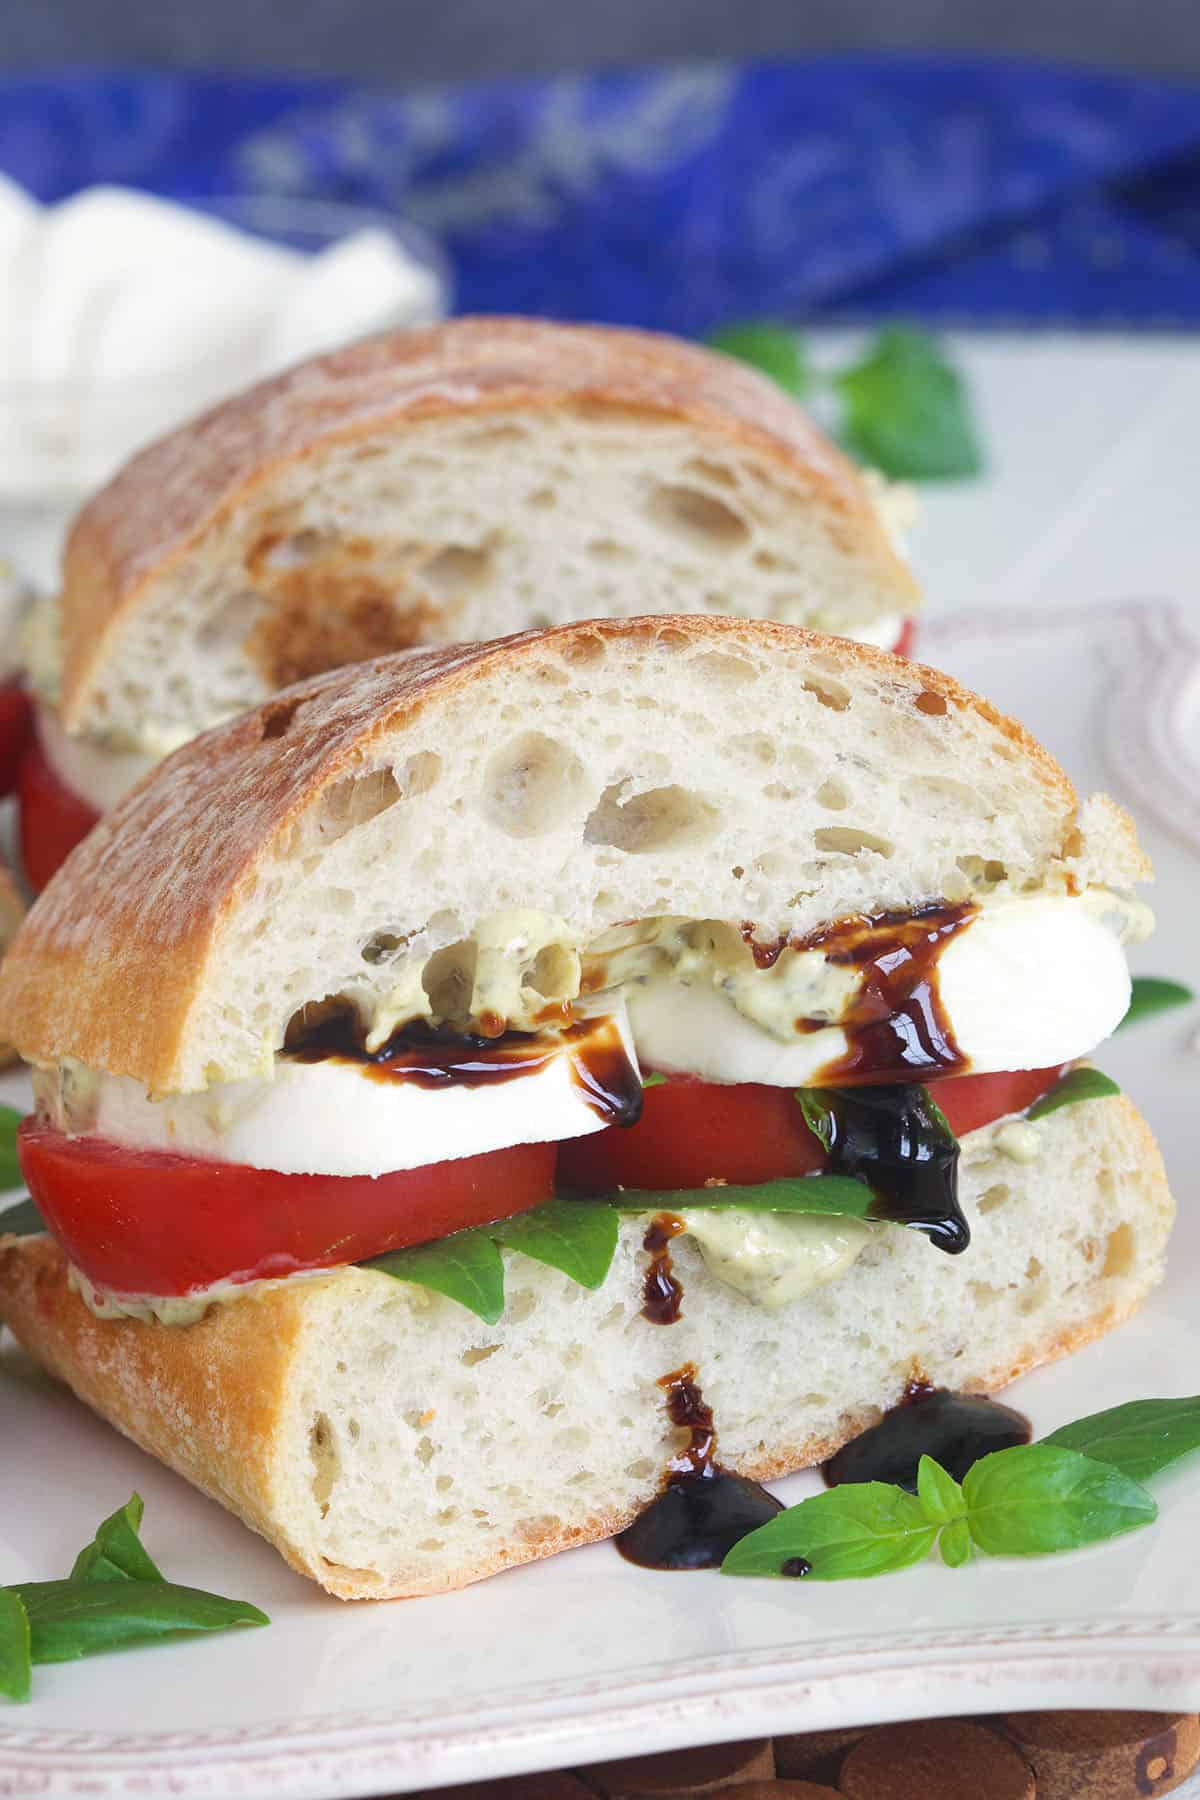 A caprese sandwich has been cut in half and is served with balsamic reduction.